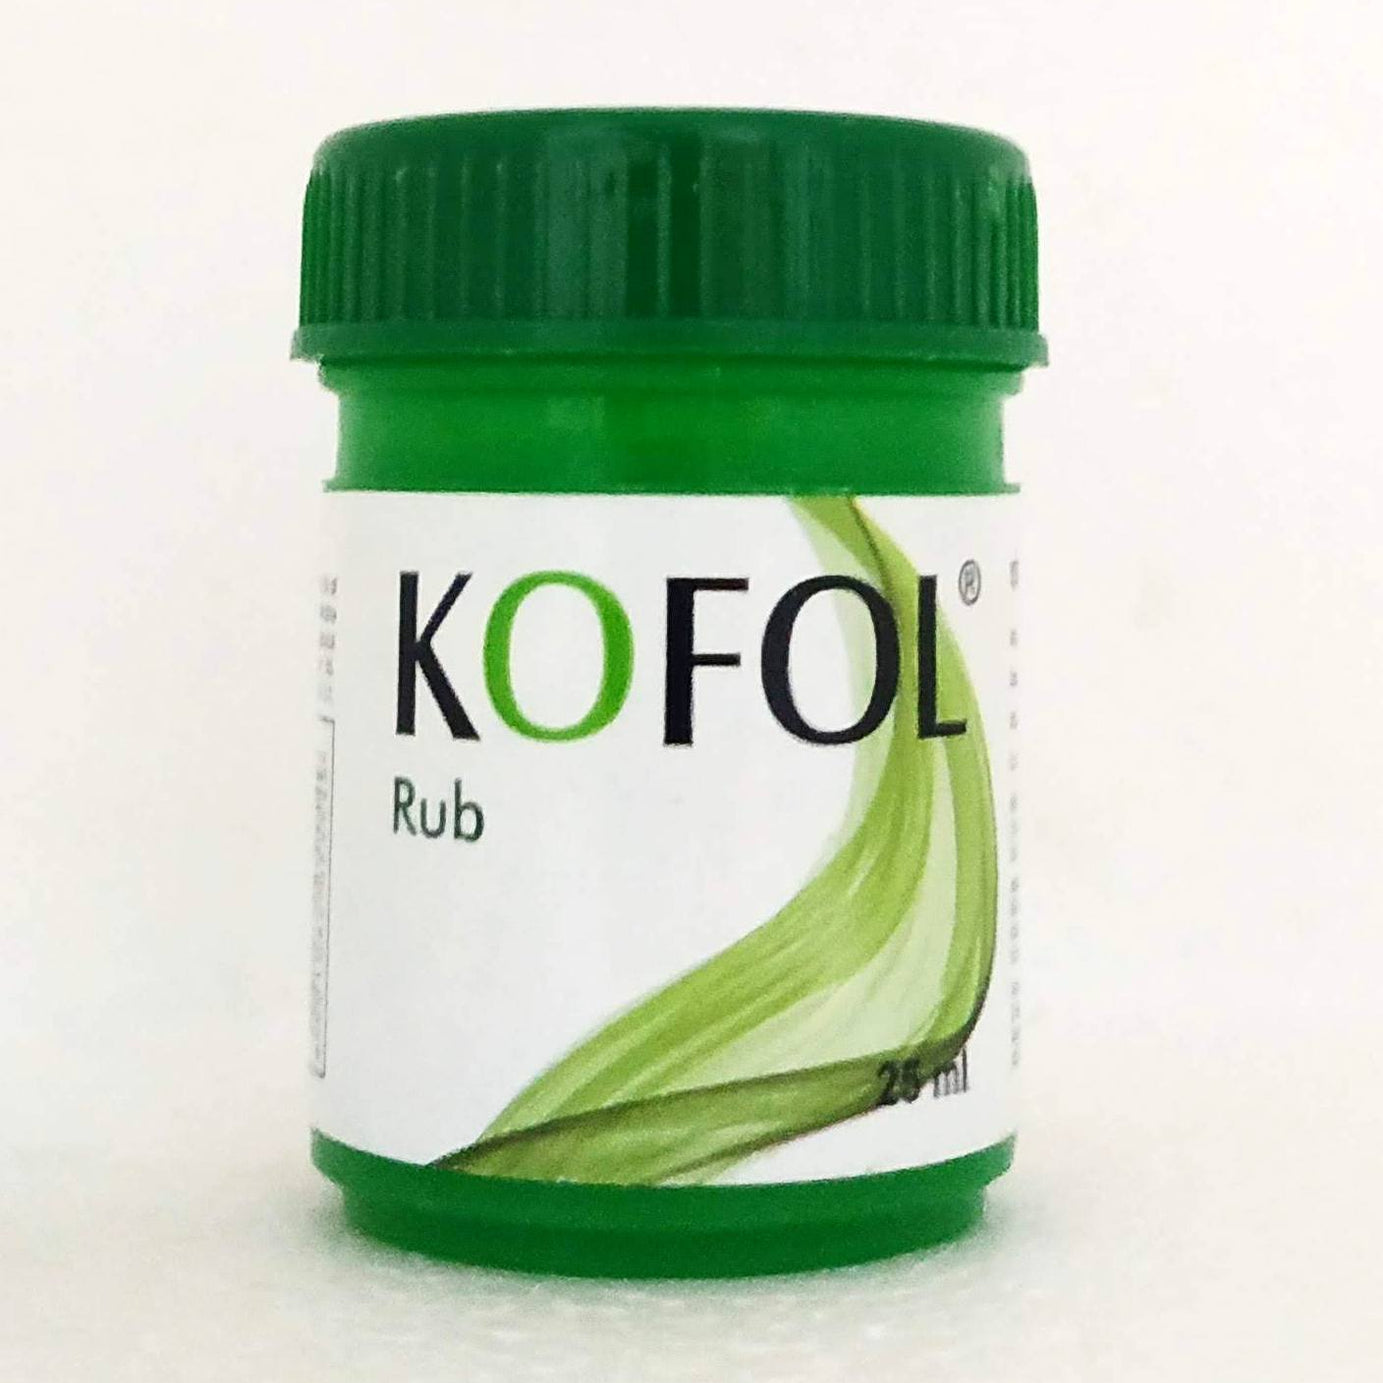 Shop Kofol rub 20gm at price 60.00 from Charak Online - Ayush Care